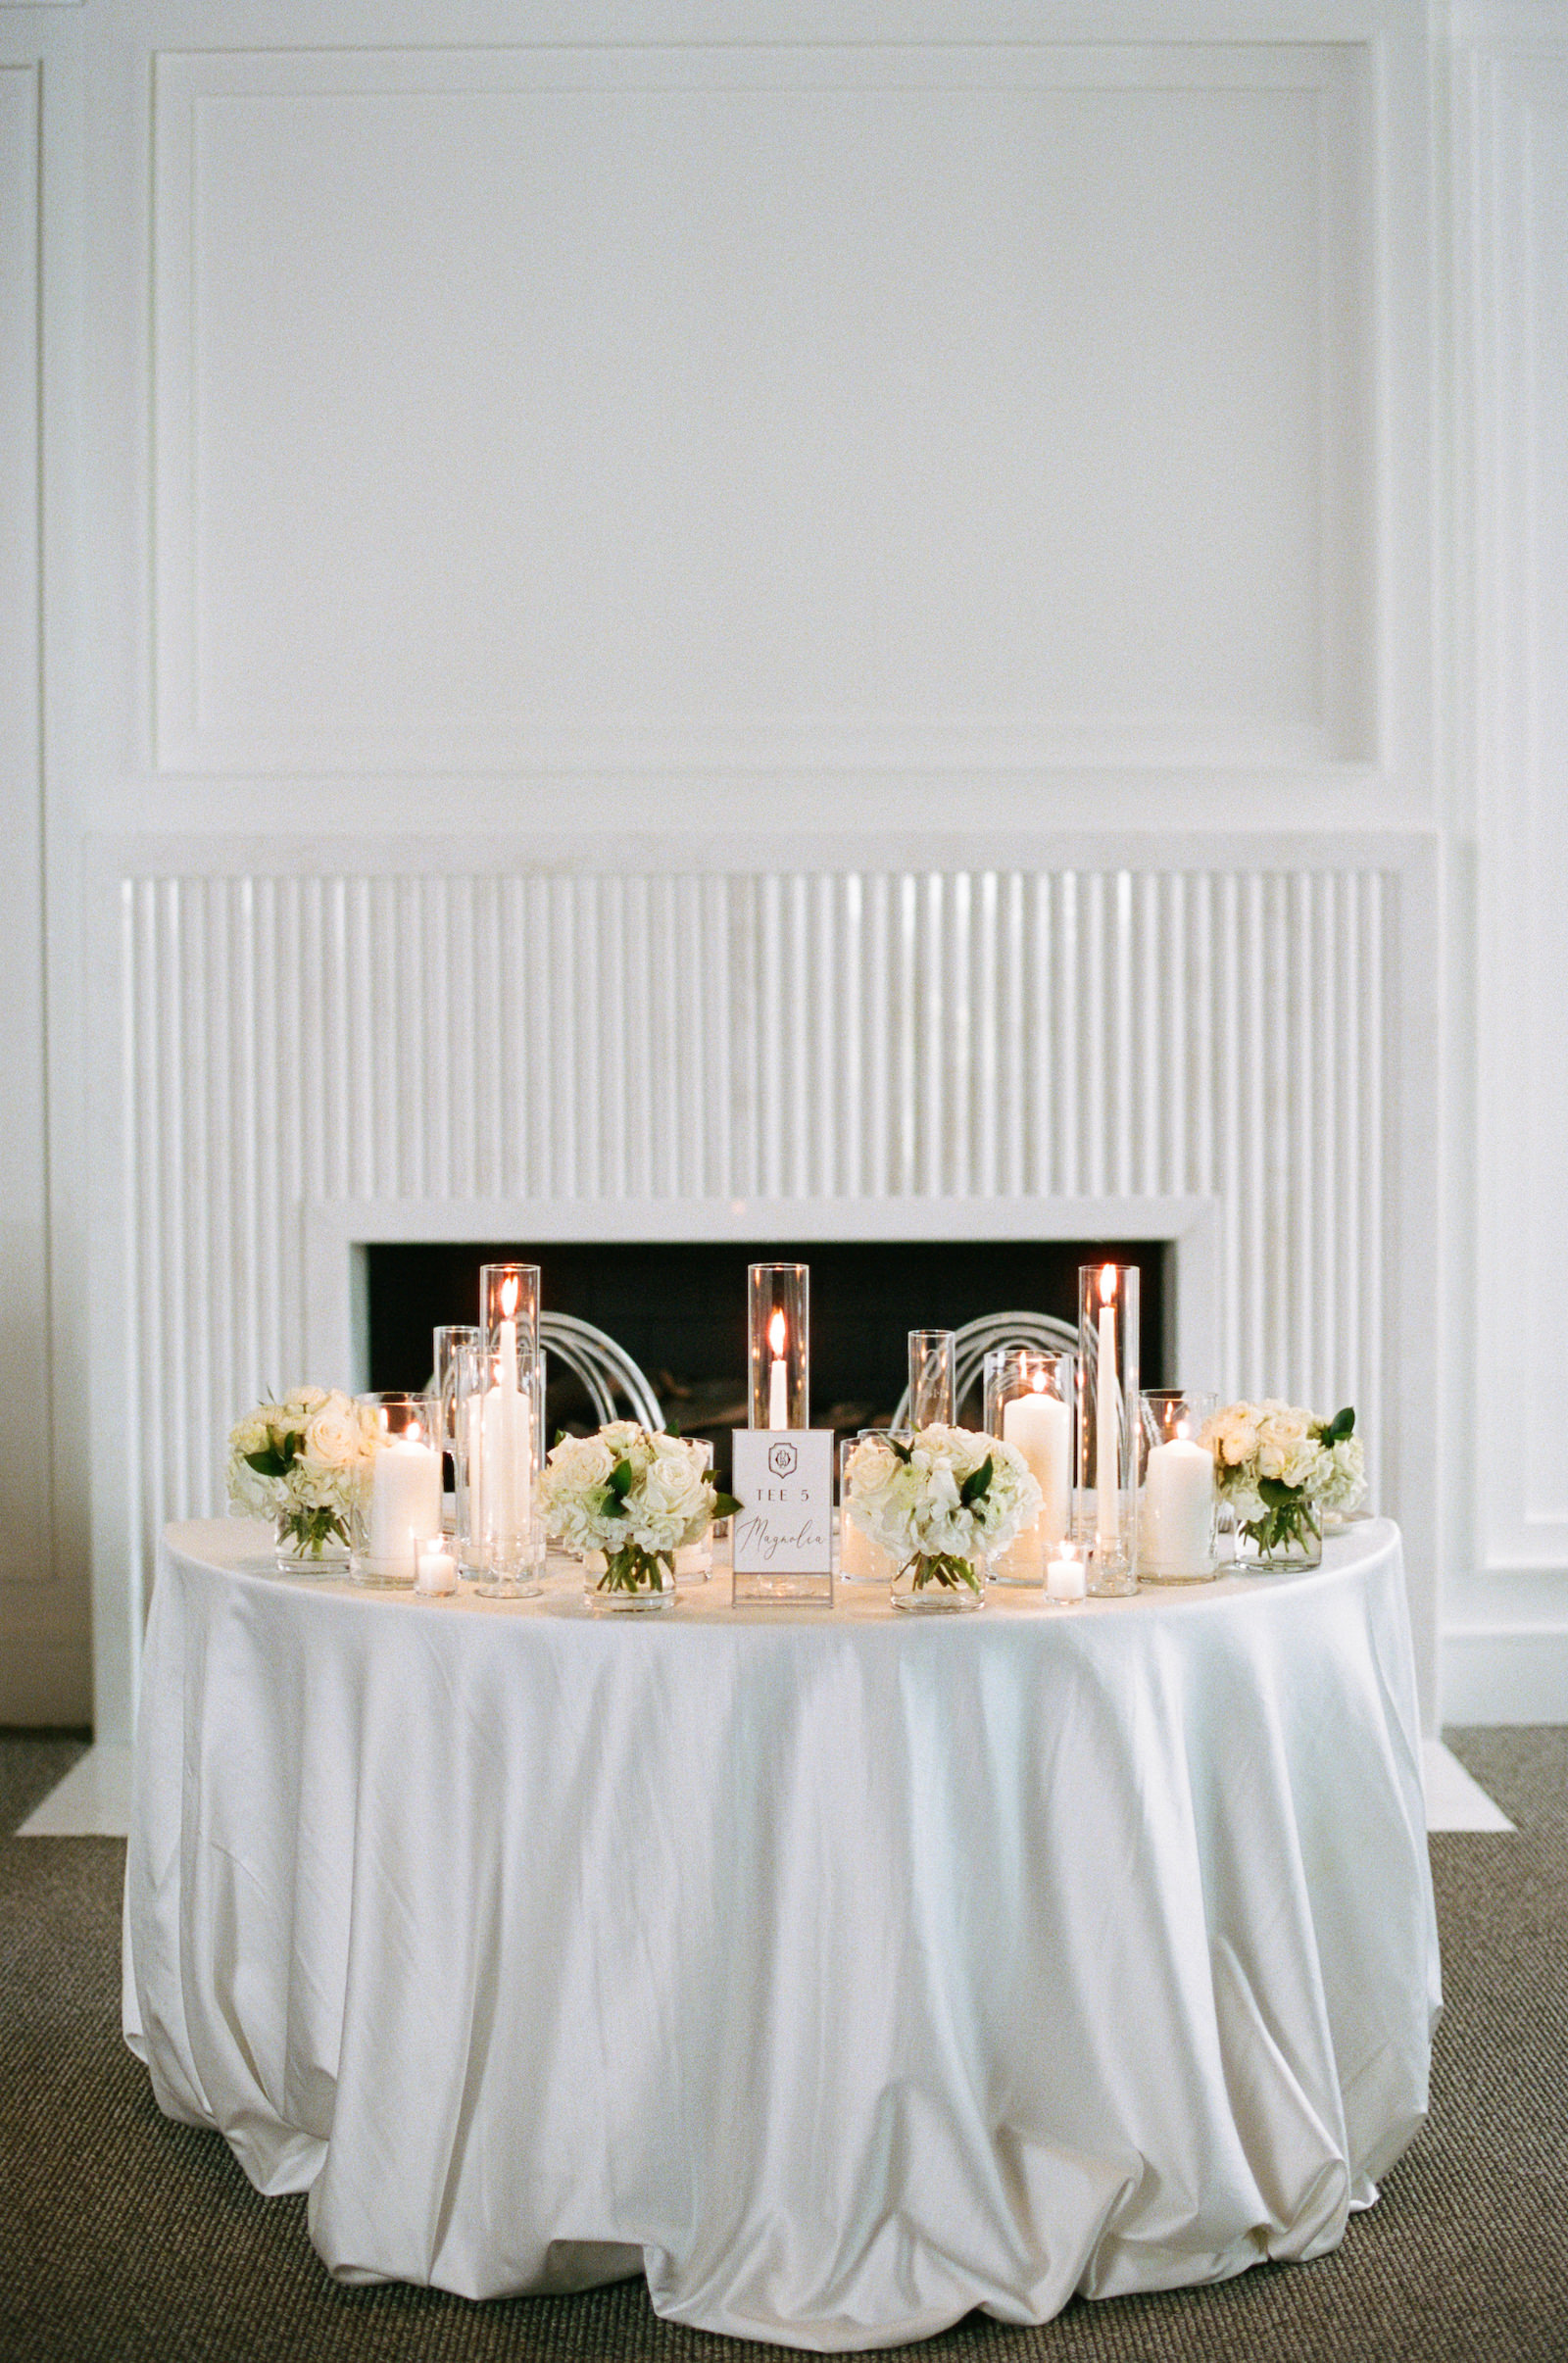 Luxurious Formal All White Wedding Reception Decor, Sweetheart Table with Candles and White Florals | Tampa Bay Wedding Planner Parties A'la Carte | Wedding Florist Bruce Wayne Florals | Wedding Rentals Gabro Event Services